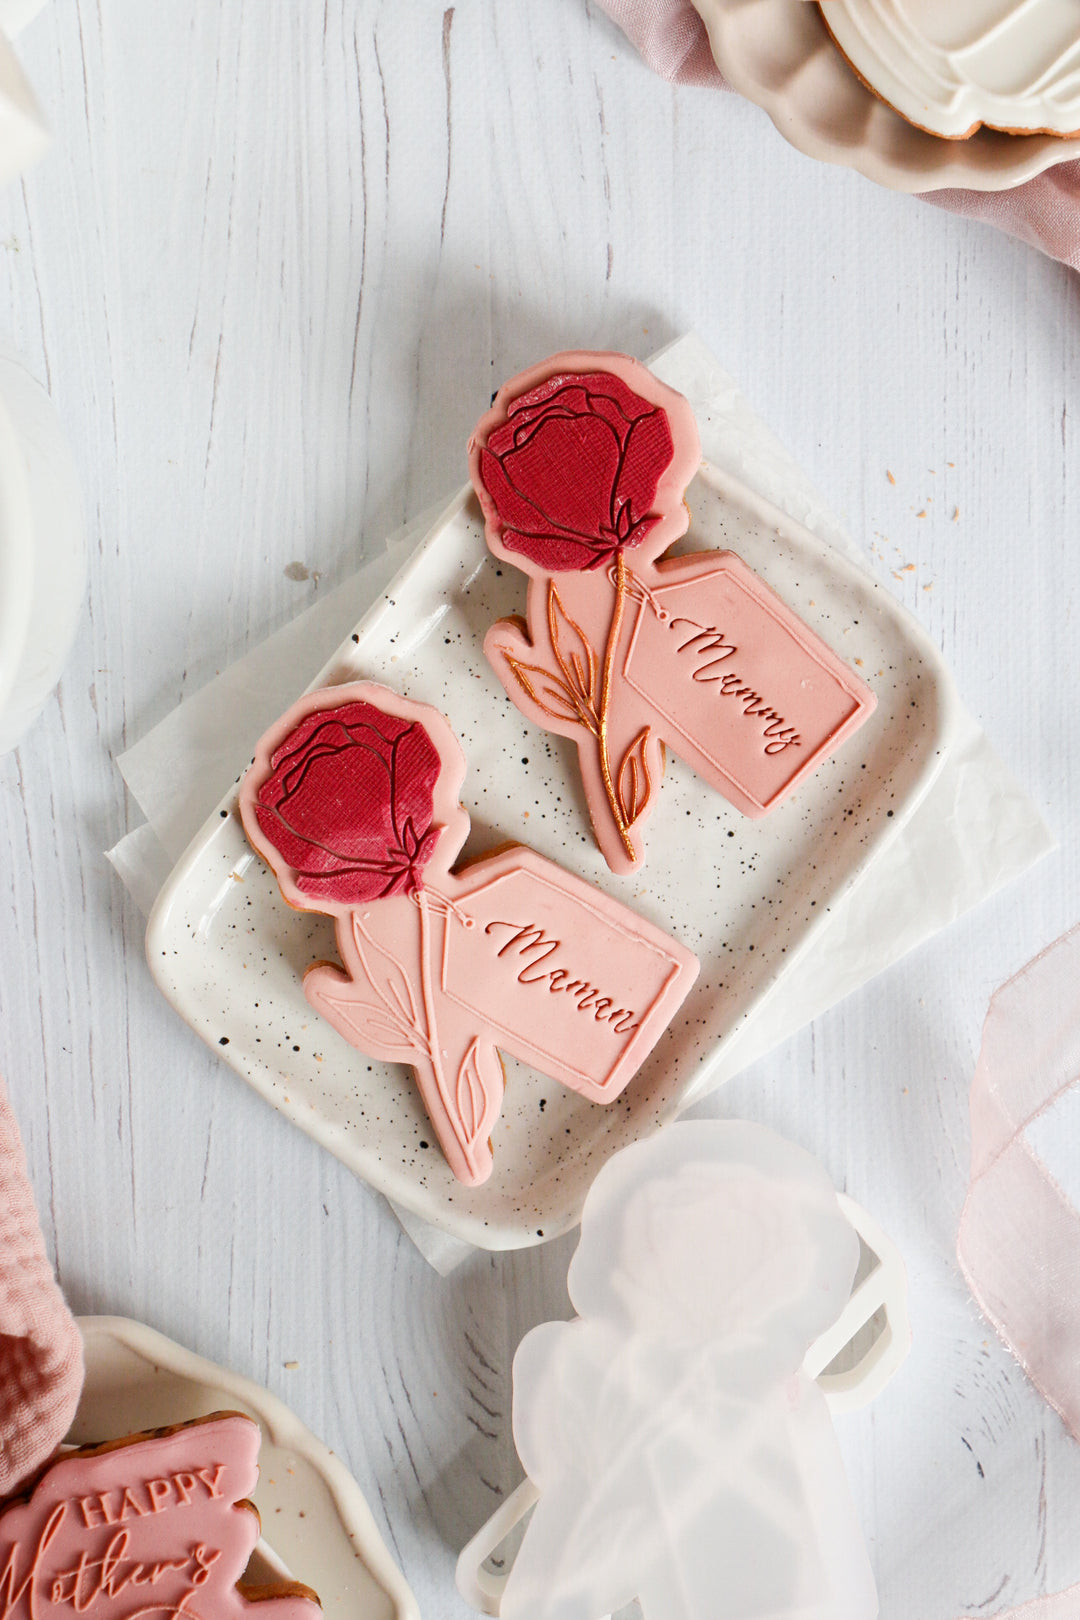 Rose and label stamp + cookie cutter